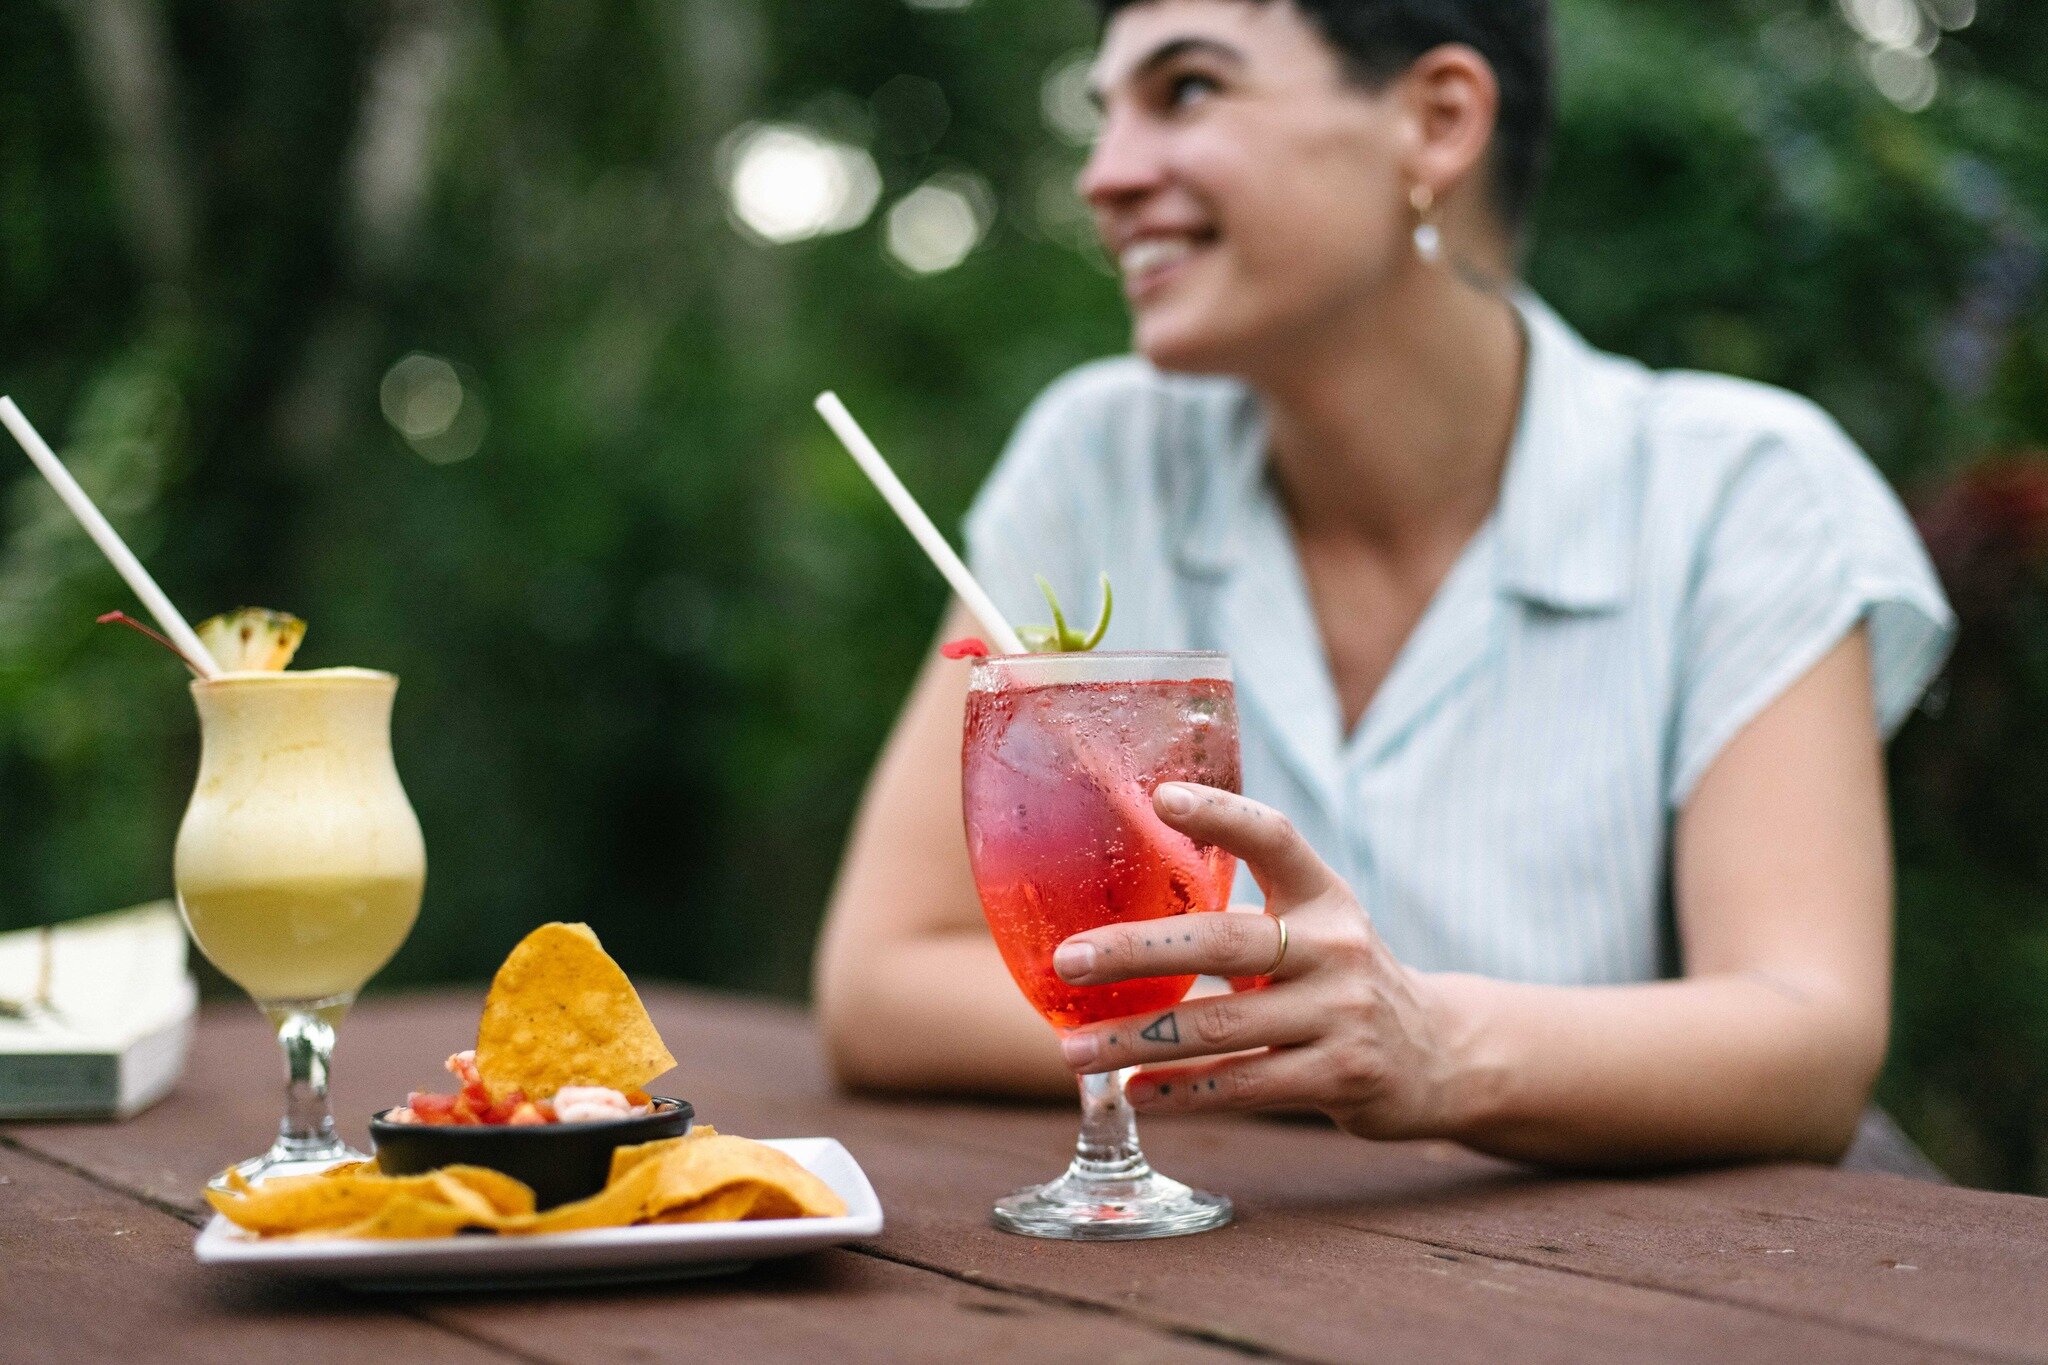 Happy Fri-YAY! Let's celebrate the weekend with ceviche and some cocktails!
See you at the Wild Fig at Bocawina! 🍤🍹🍹 Cheeeeers!
#BelizeAwaits #GrabLife  #friyay 
.
.
Photo &copy;  Dana Halferty  on Instagram 
she/her 
🏳️&zwj;🌈 Portland, OR by wa